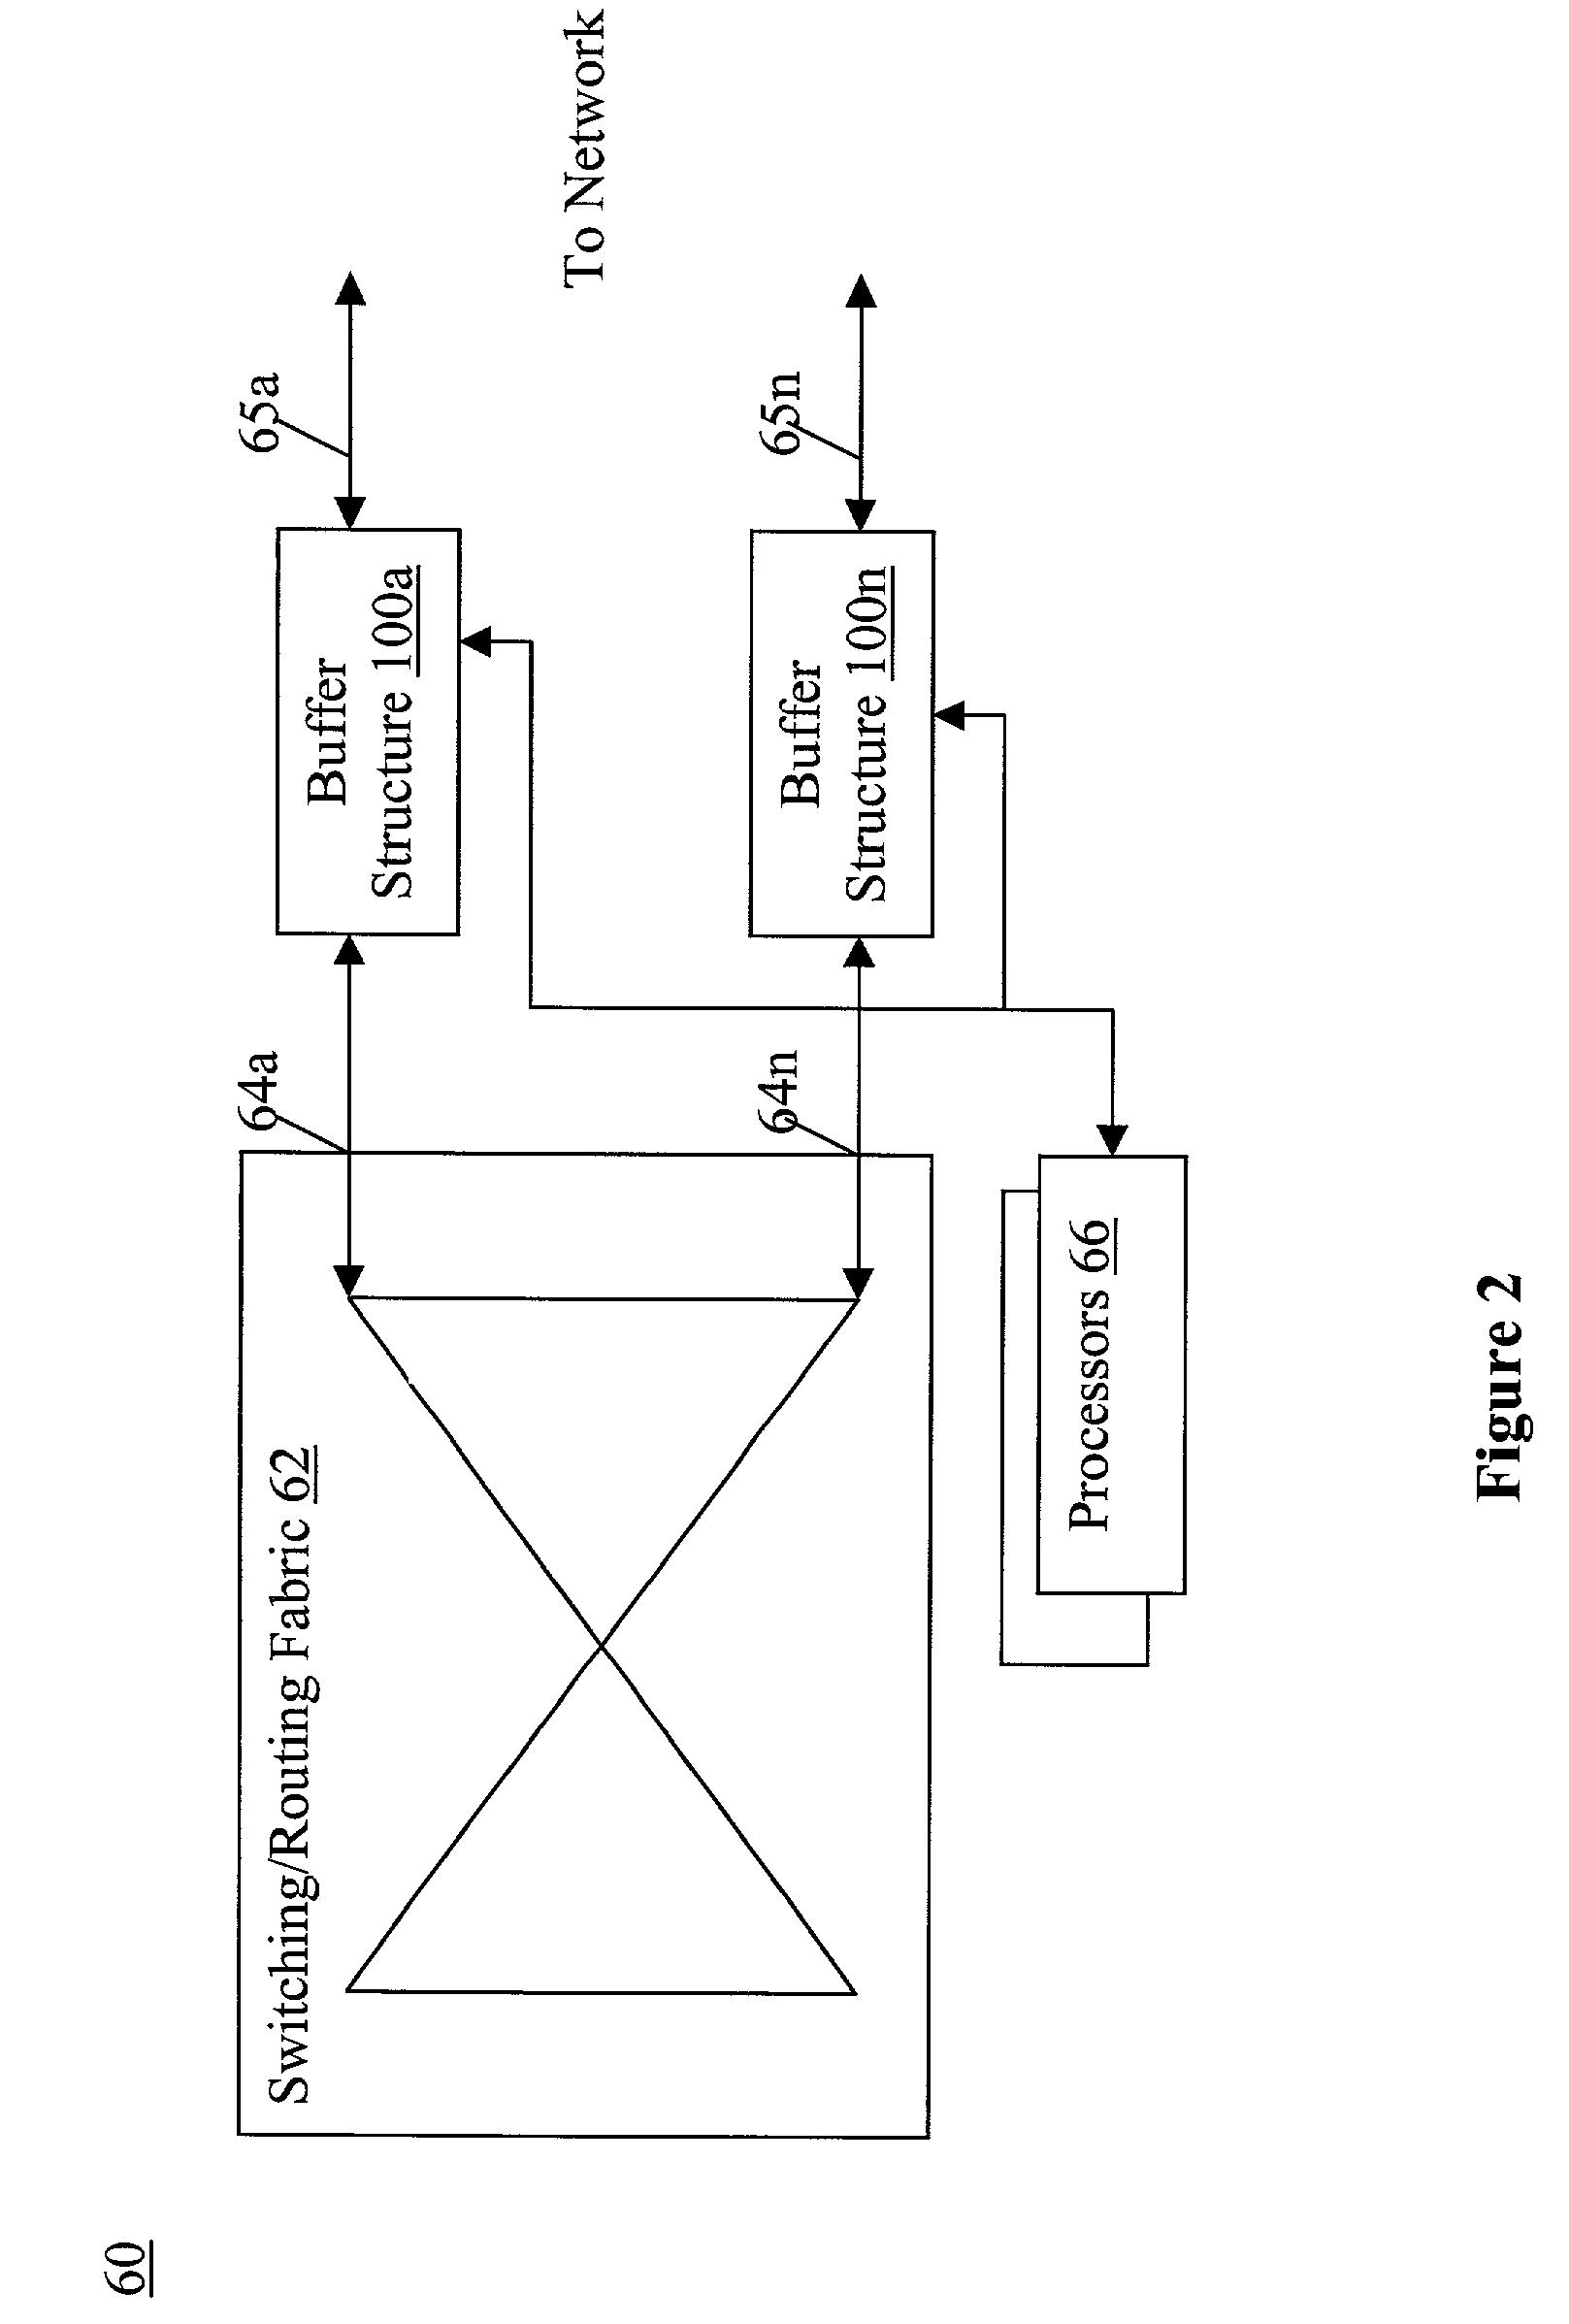 Data link/physical layer packet diversion and insertion